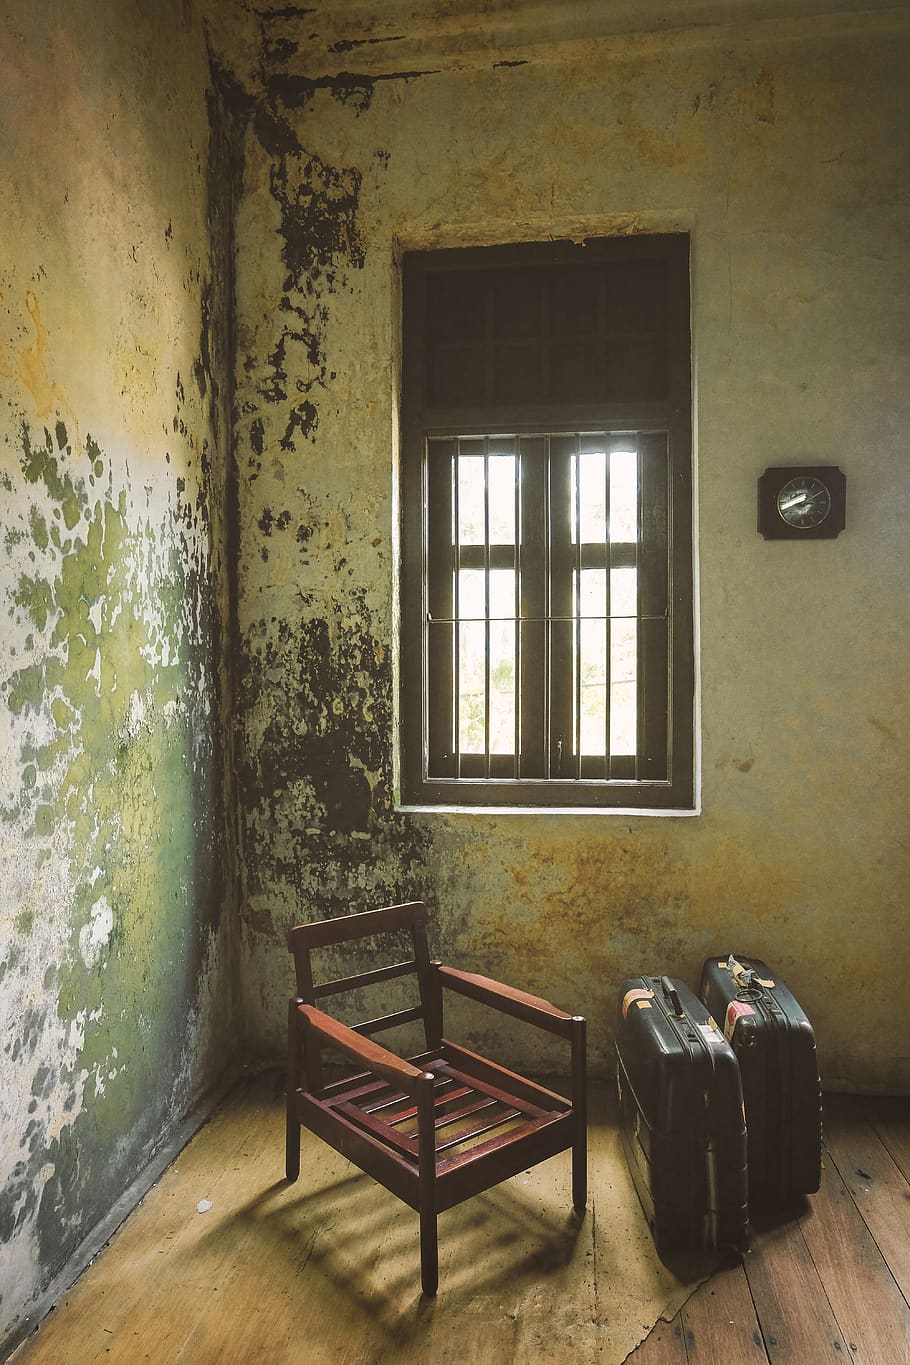 veterans day, background, house, old, window, chair, luggage, vintage, film, indoors